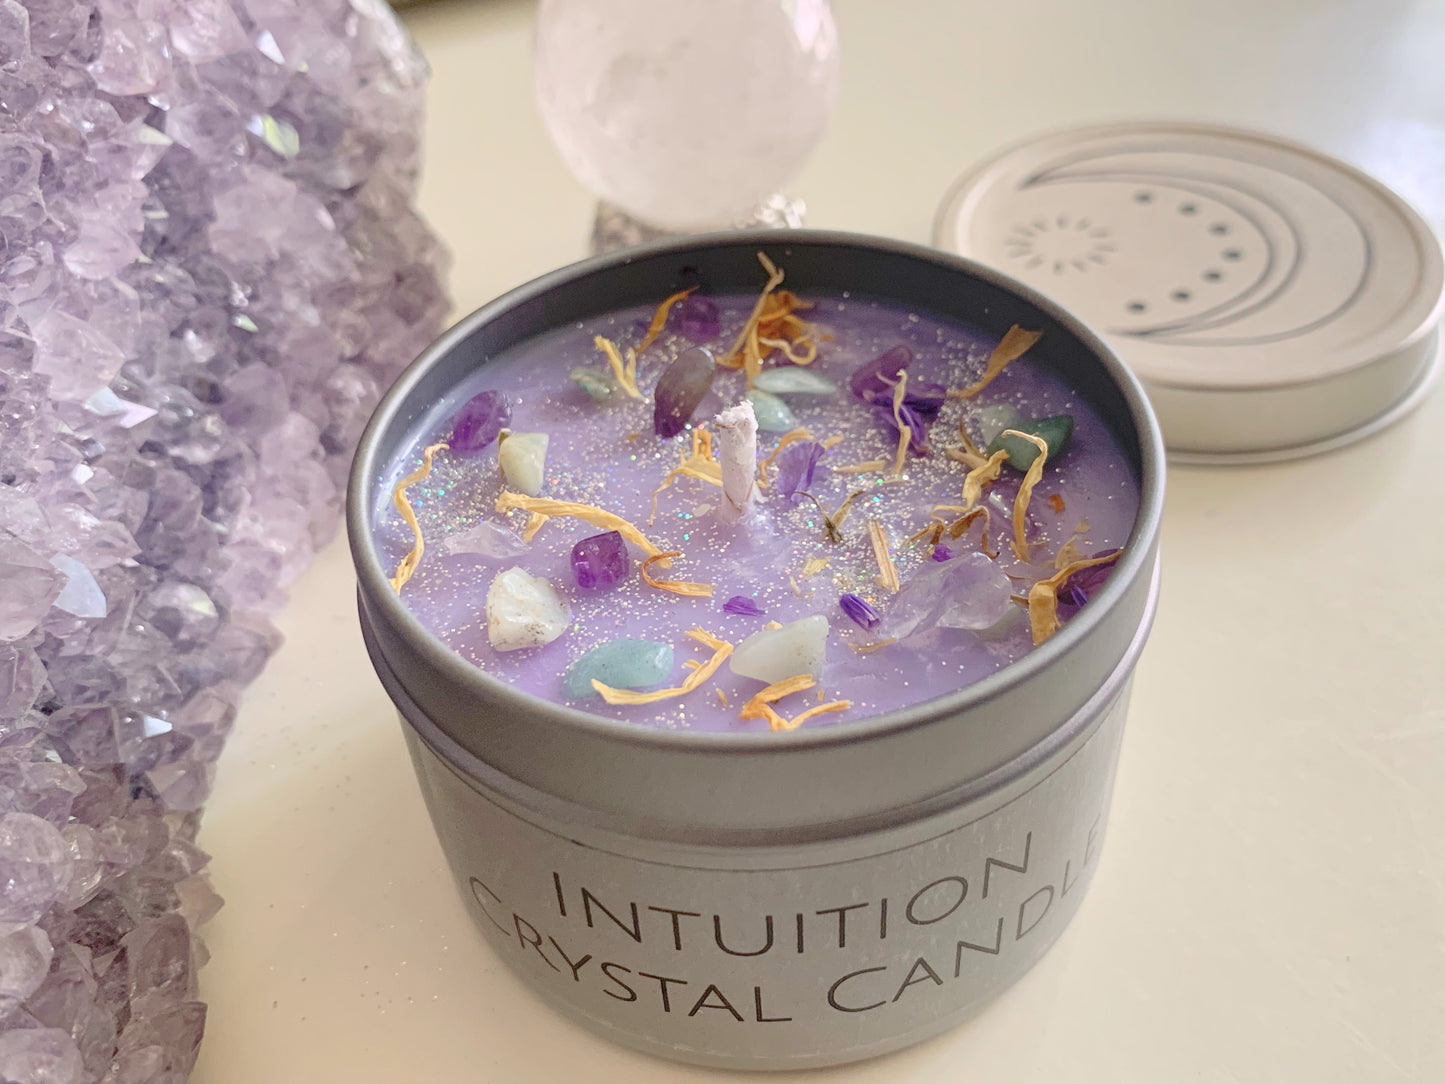 Intuition Crystal Candle